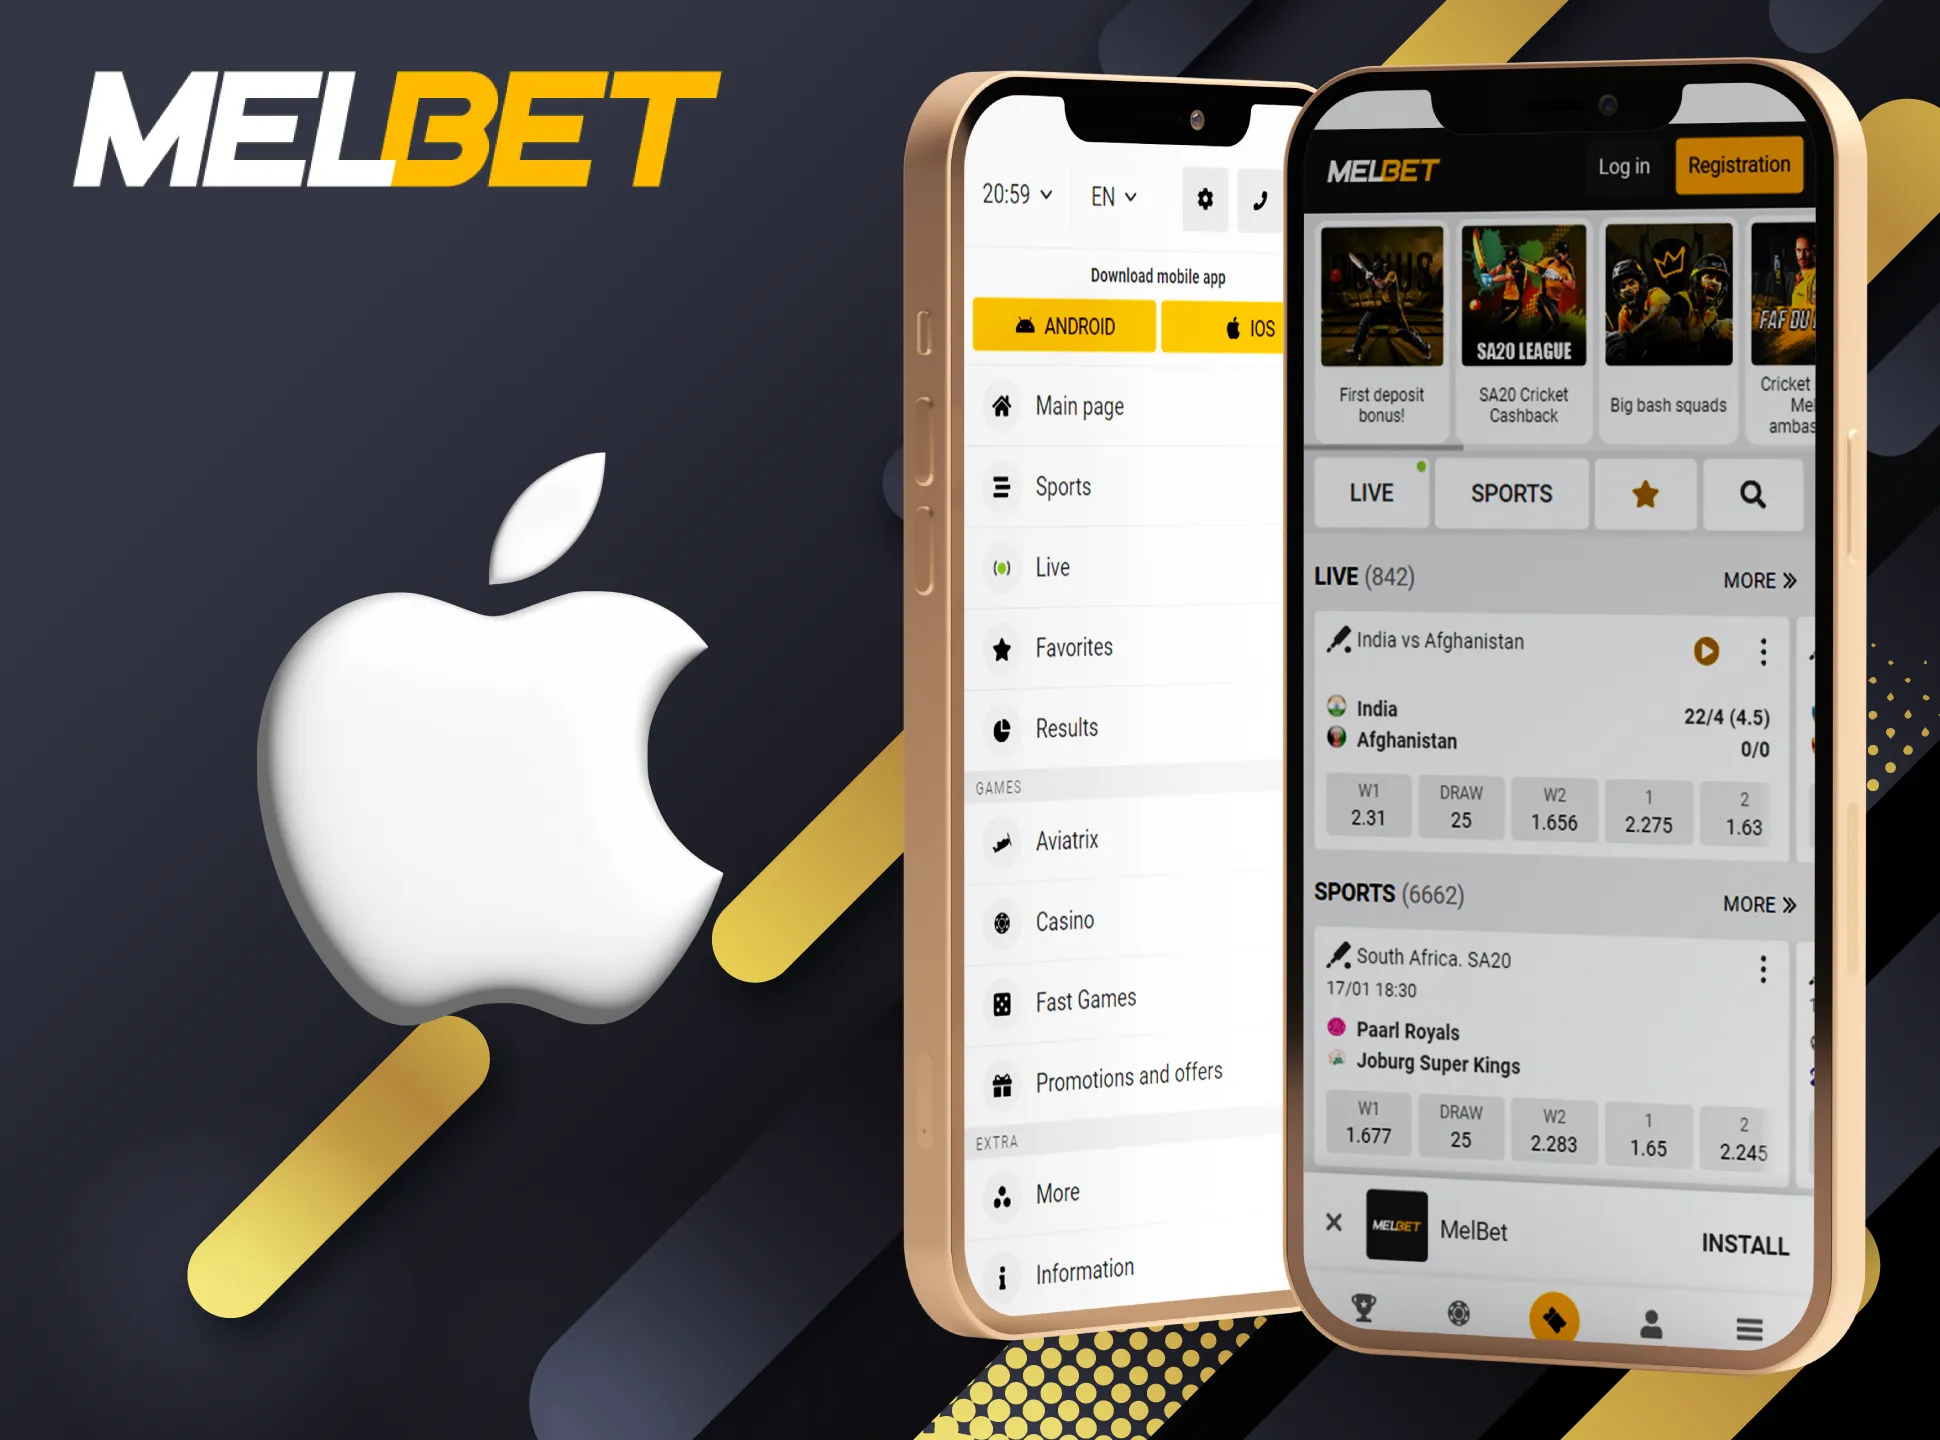 You can install the Melbet app on any modern iOS device.